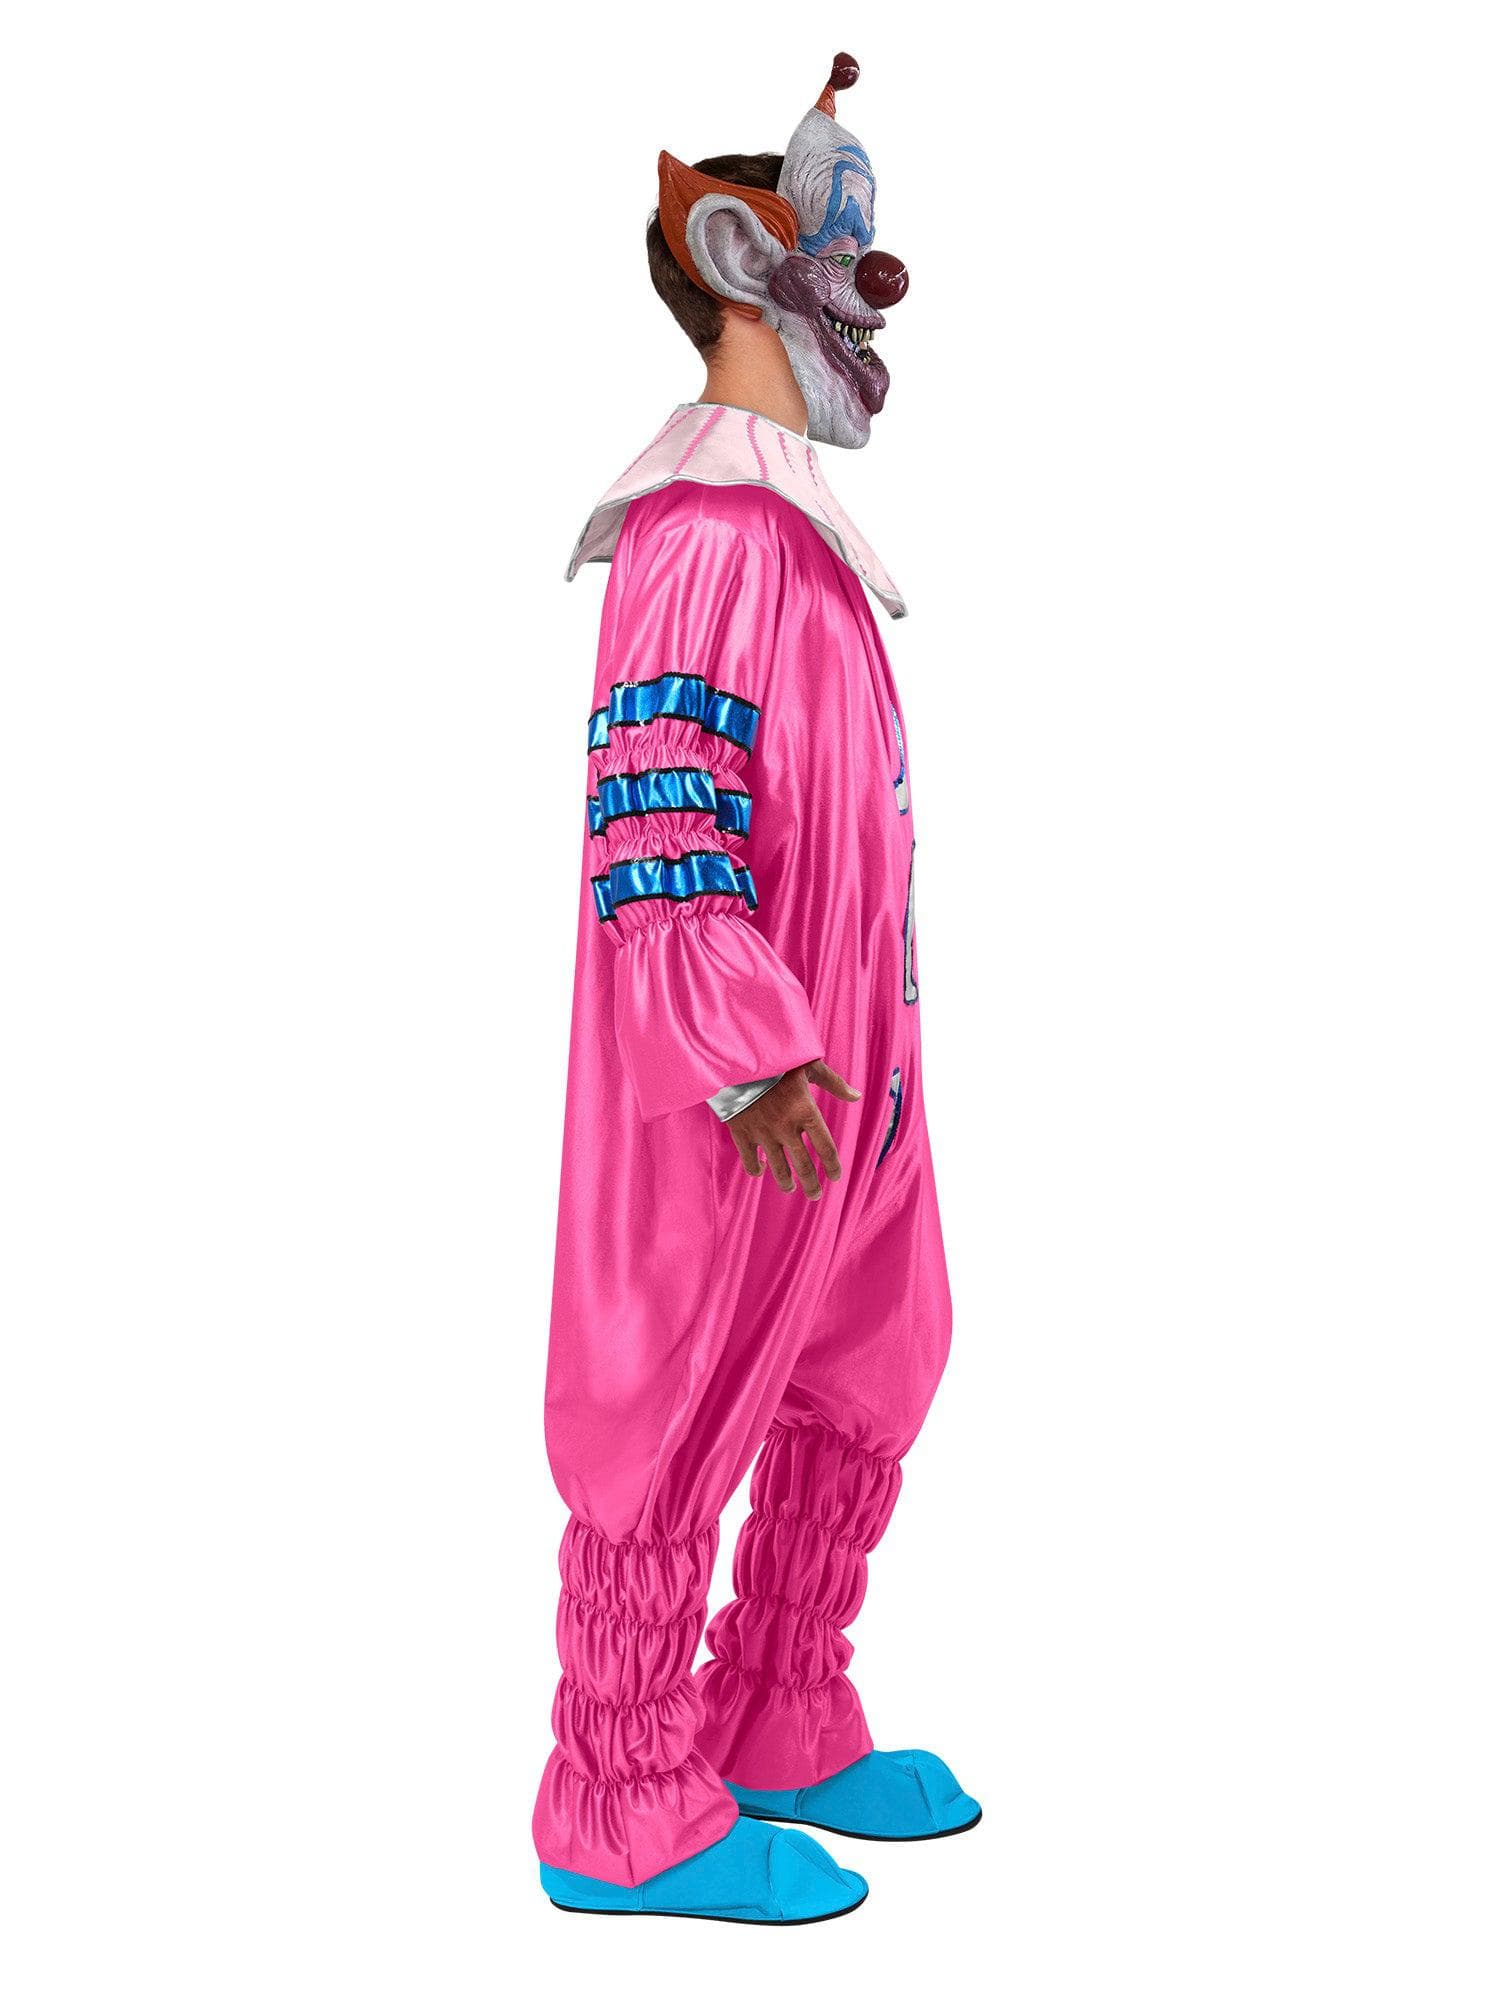 Killer Klowns from Outer Space Slim Adult Costume - costumes.com